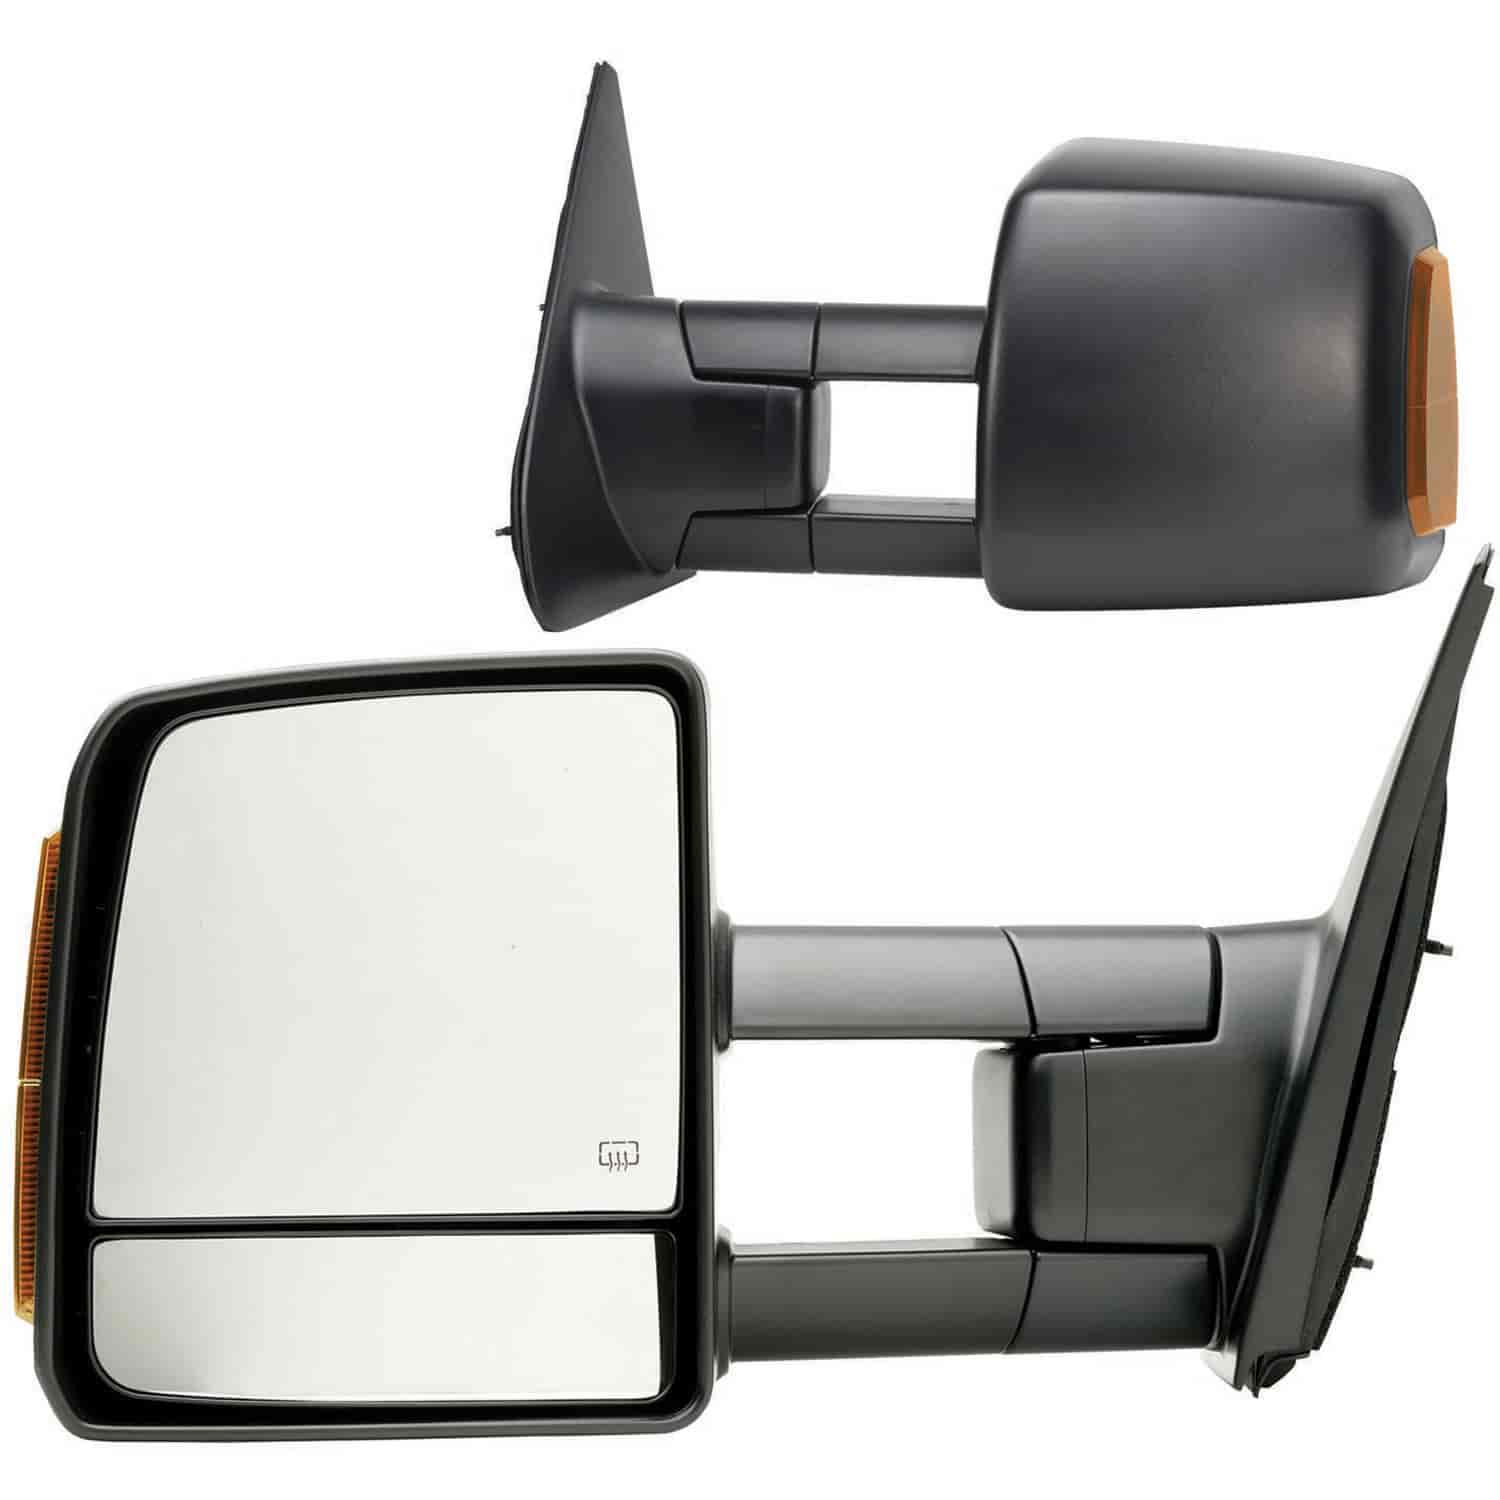 OEM Style Replacement mirror set for 07-14 Toyota Tundra Pick-Up 08-14 Sequoia extendable towing mir